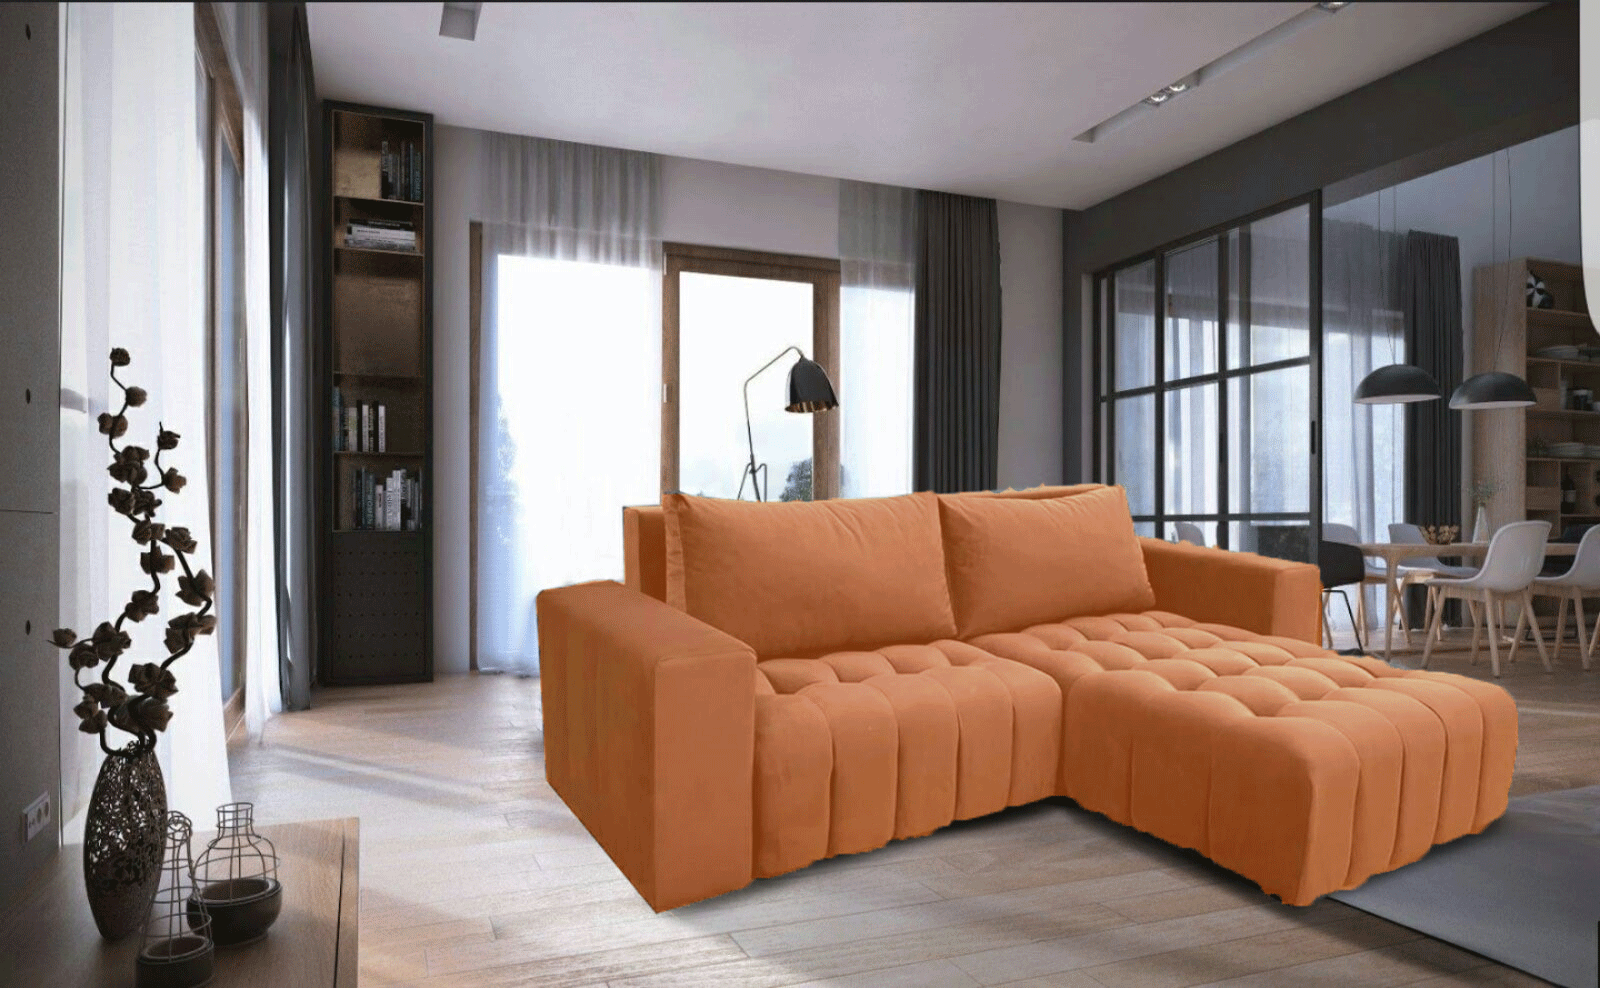 Brands SWH Modern Living Special Order Neo sofa bed w/ storage Orange